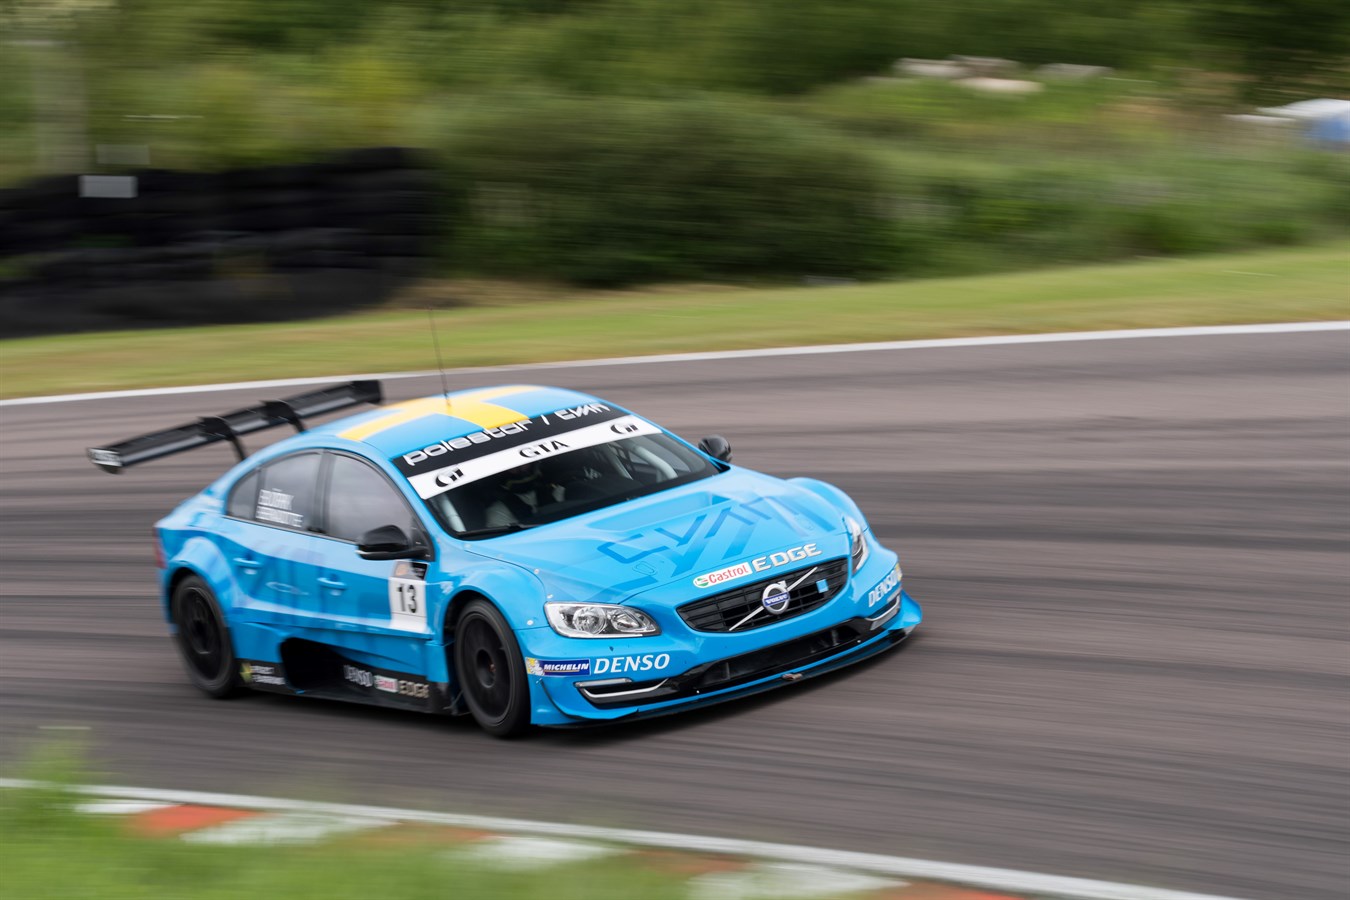 Prince Carl Philip and Thed Björk secure podium in eventful Swedish GT weekend at Falkenberg